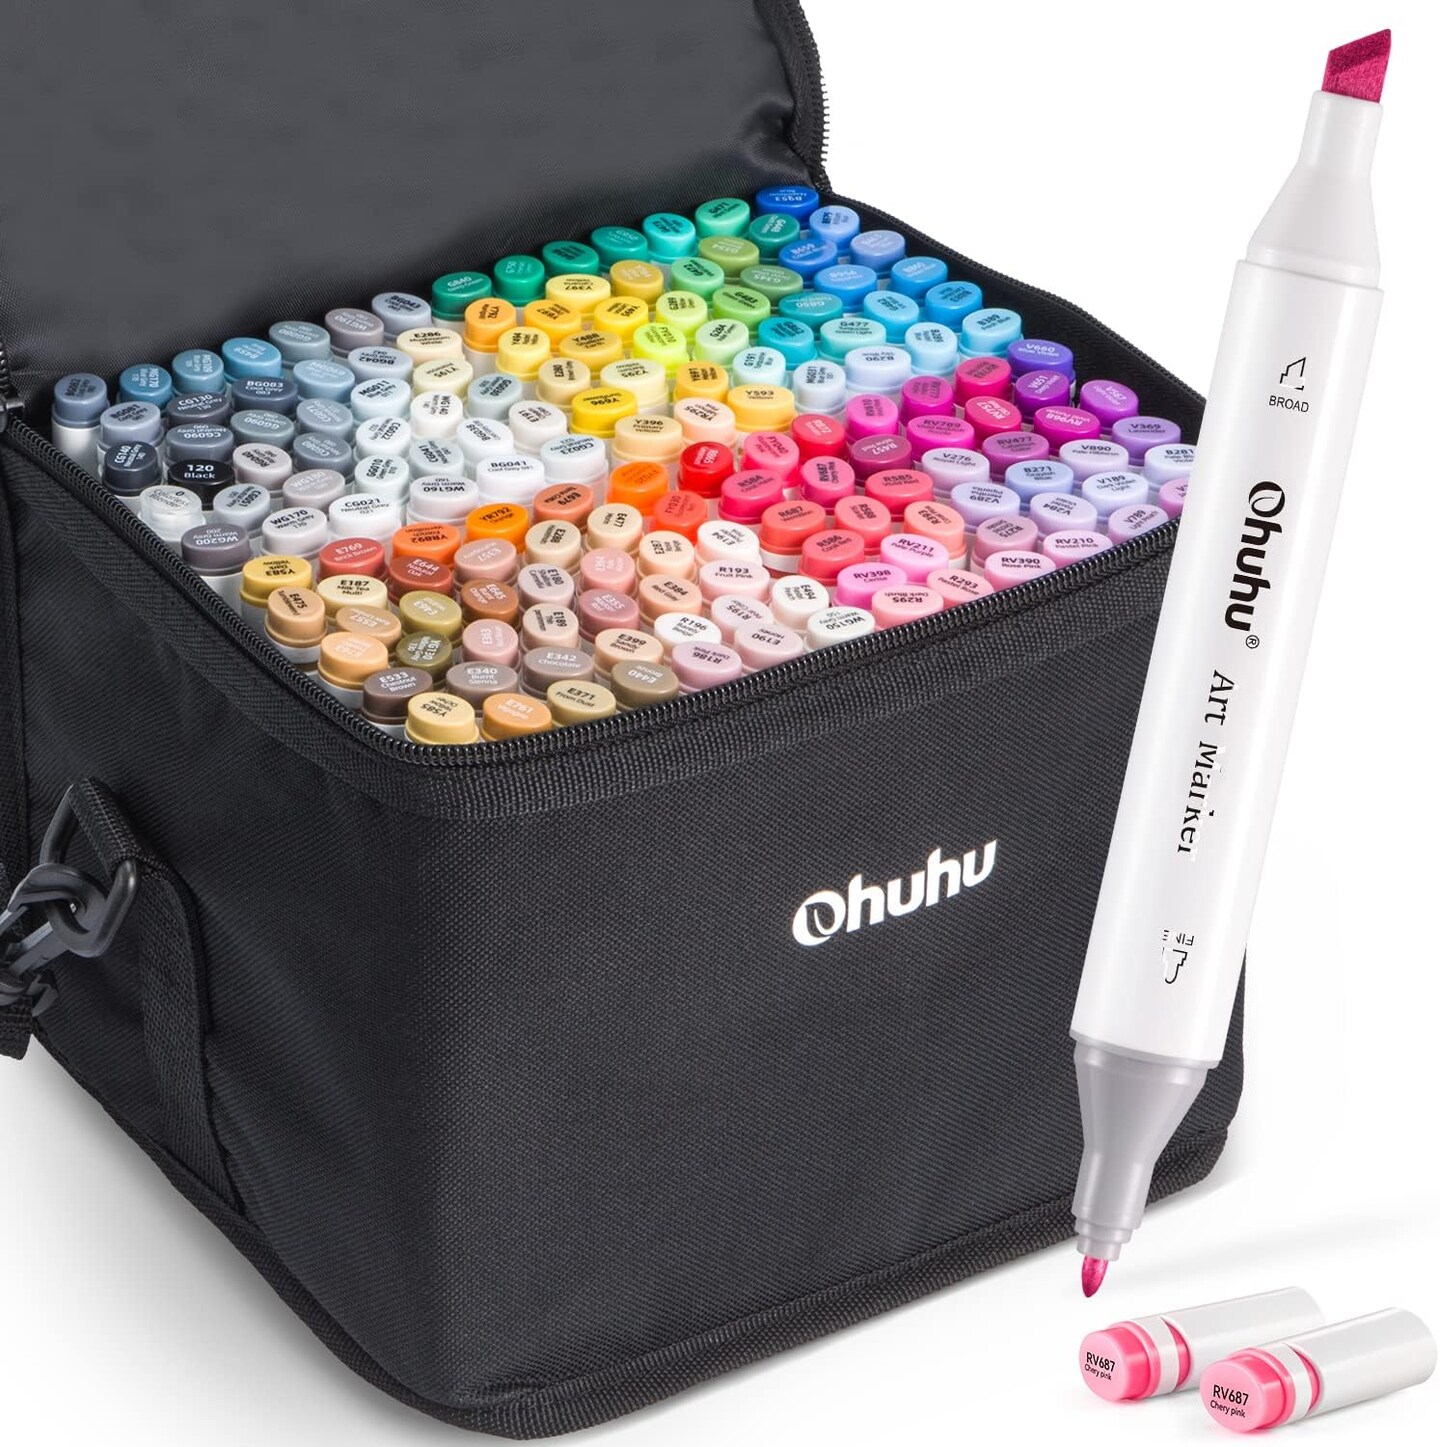 Ohuhu Dual Alcohol Art Markers - Double Tipped Alcohol-Based Marker Set for Artist Adults Coloring Sketching Illustration -160 Colors - Chisel &#x26; Fine Tips - Oahu of Ohuhu Markers - Refillable Ink